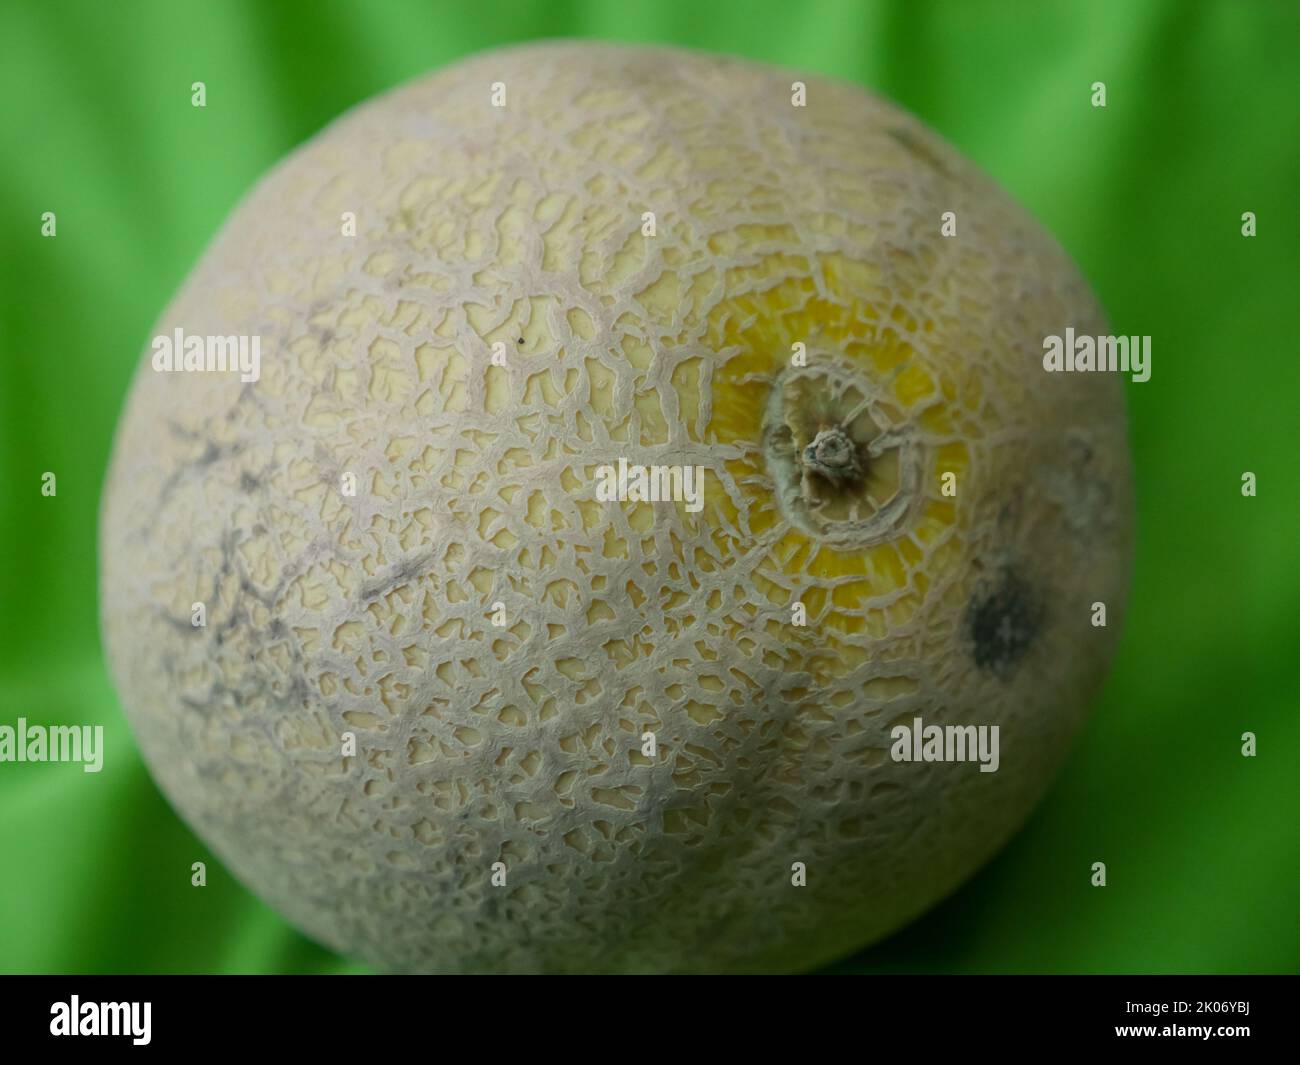 Juicy ripe whole Muskmelon, also known as Cucumis melo placed in green background. Stock Photo